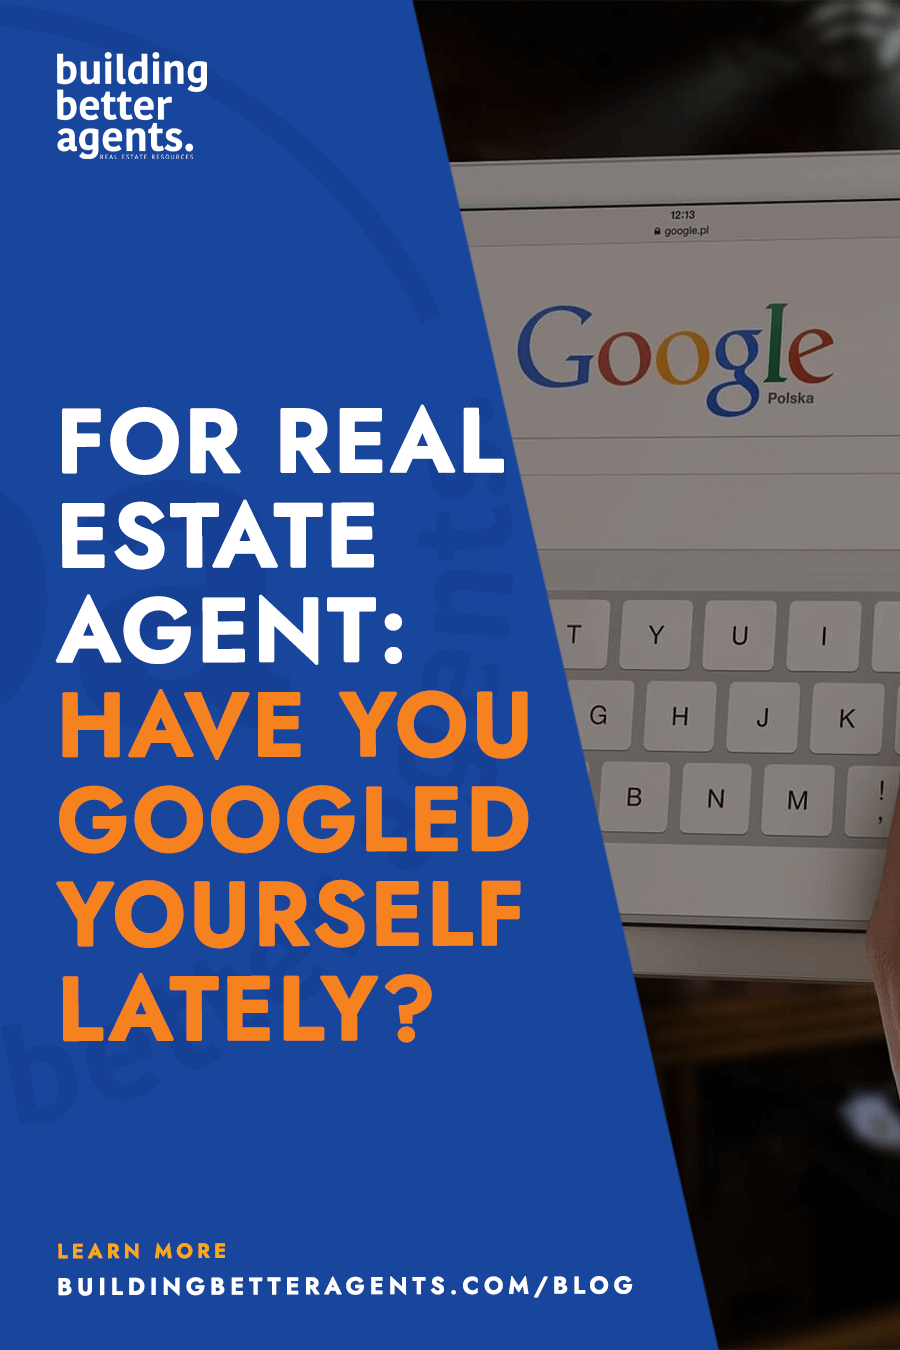 For Real Estate Agents: Have You Googled Yourself Lately?